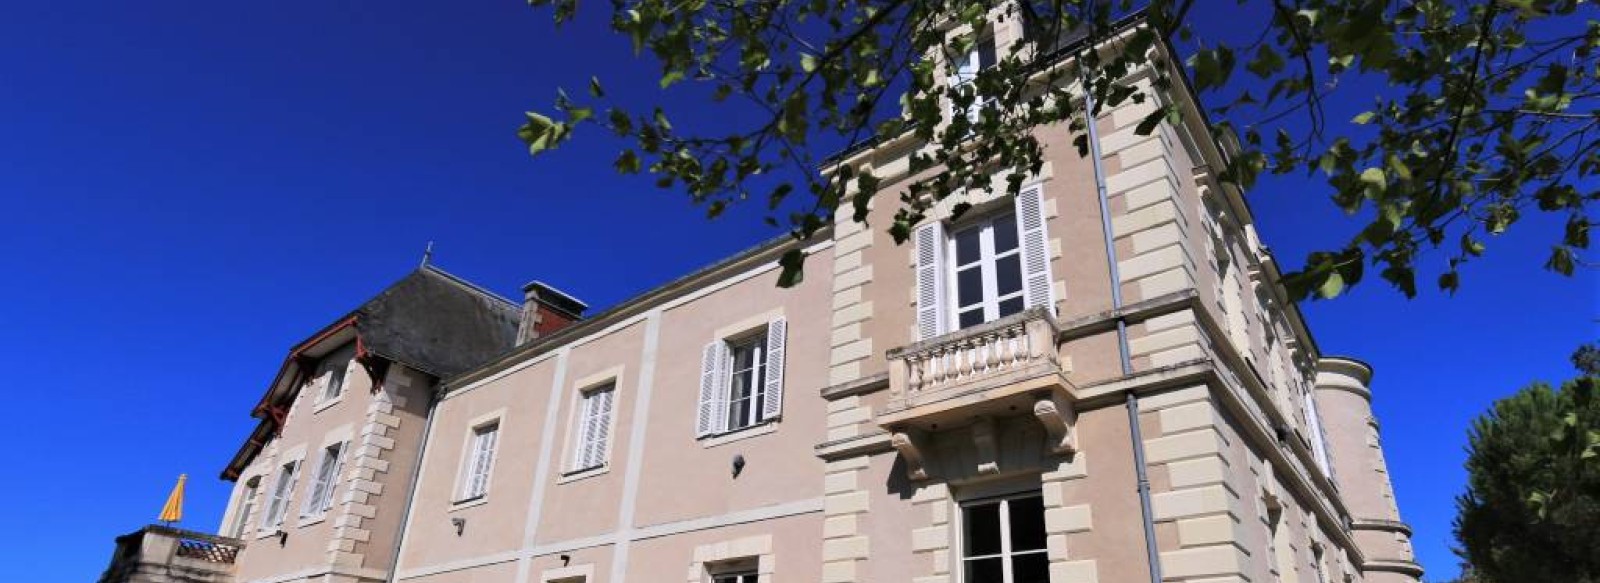 CHAMBRES D'HOTES CHATEAU PIEGUE